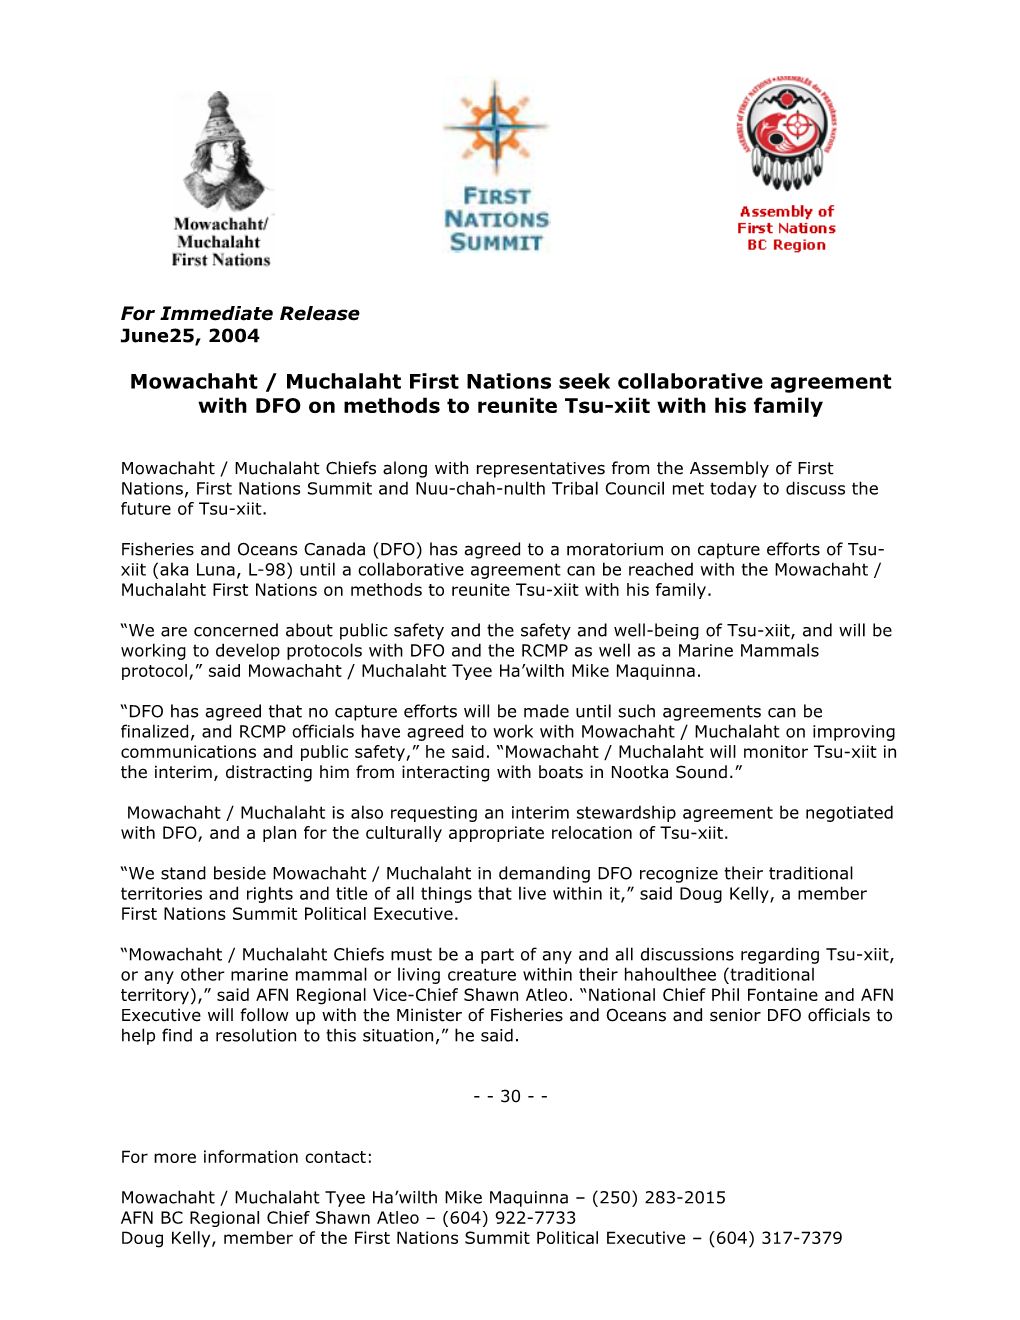 Mowachaht / Muchalaht First Nations Seek Collaborative Agreement with DFO on Methods to Reunite Tsu-Xiit with His Family